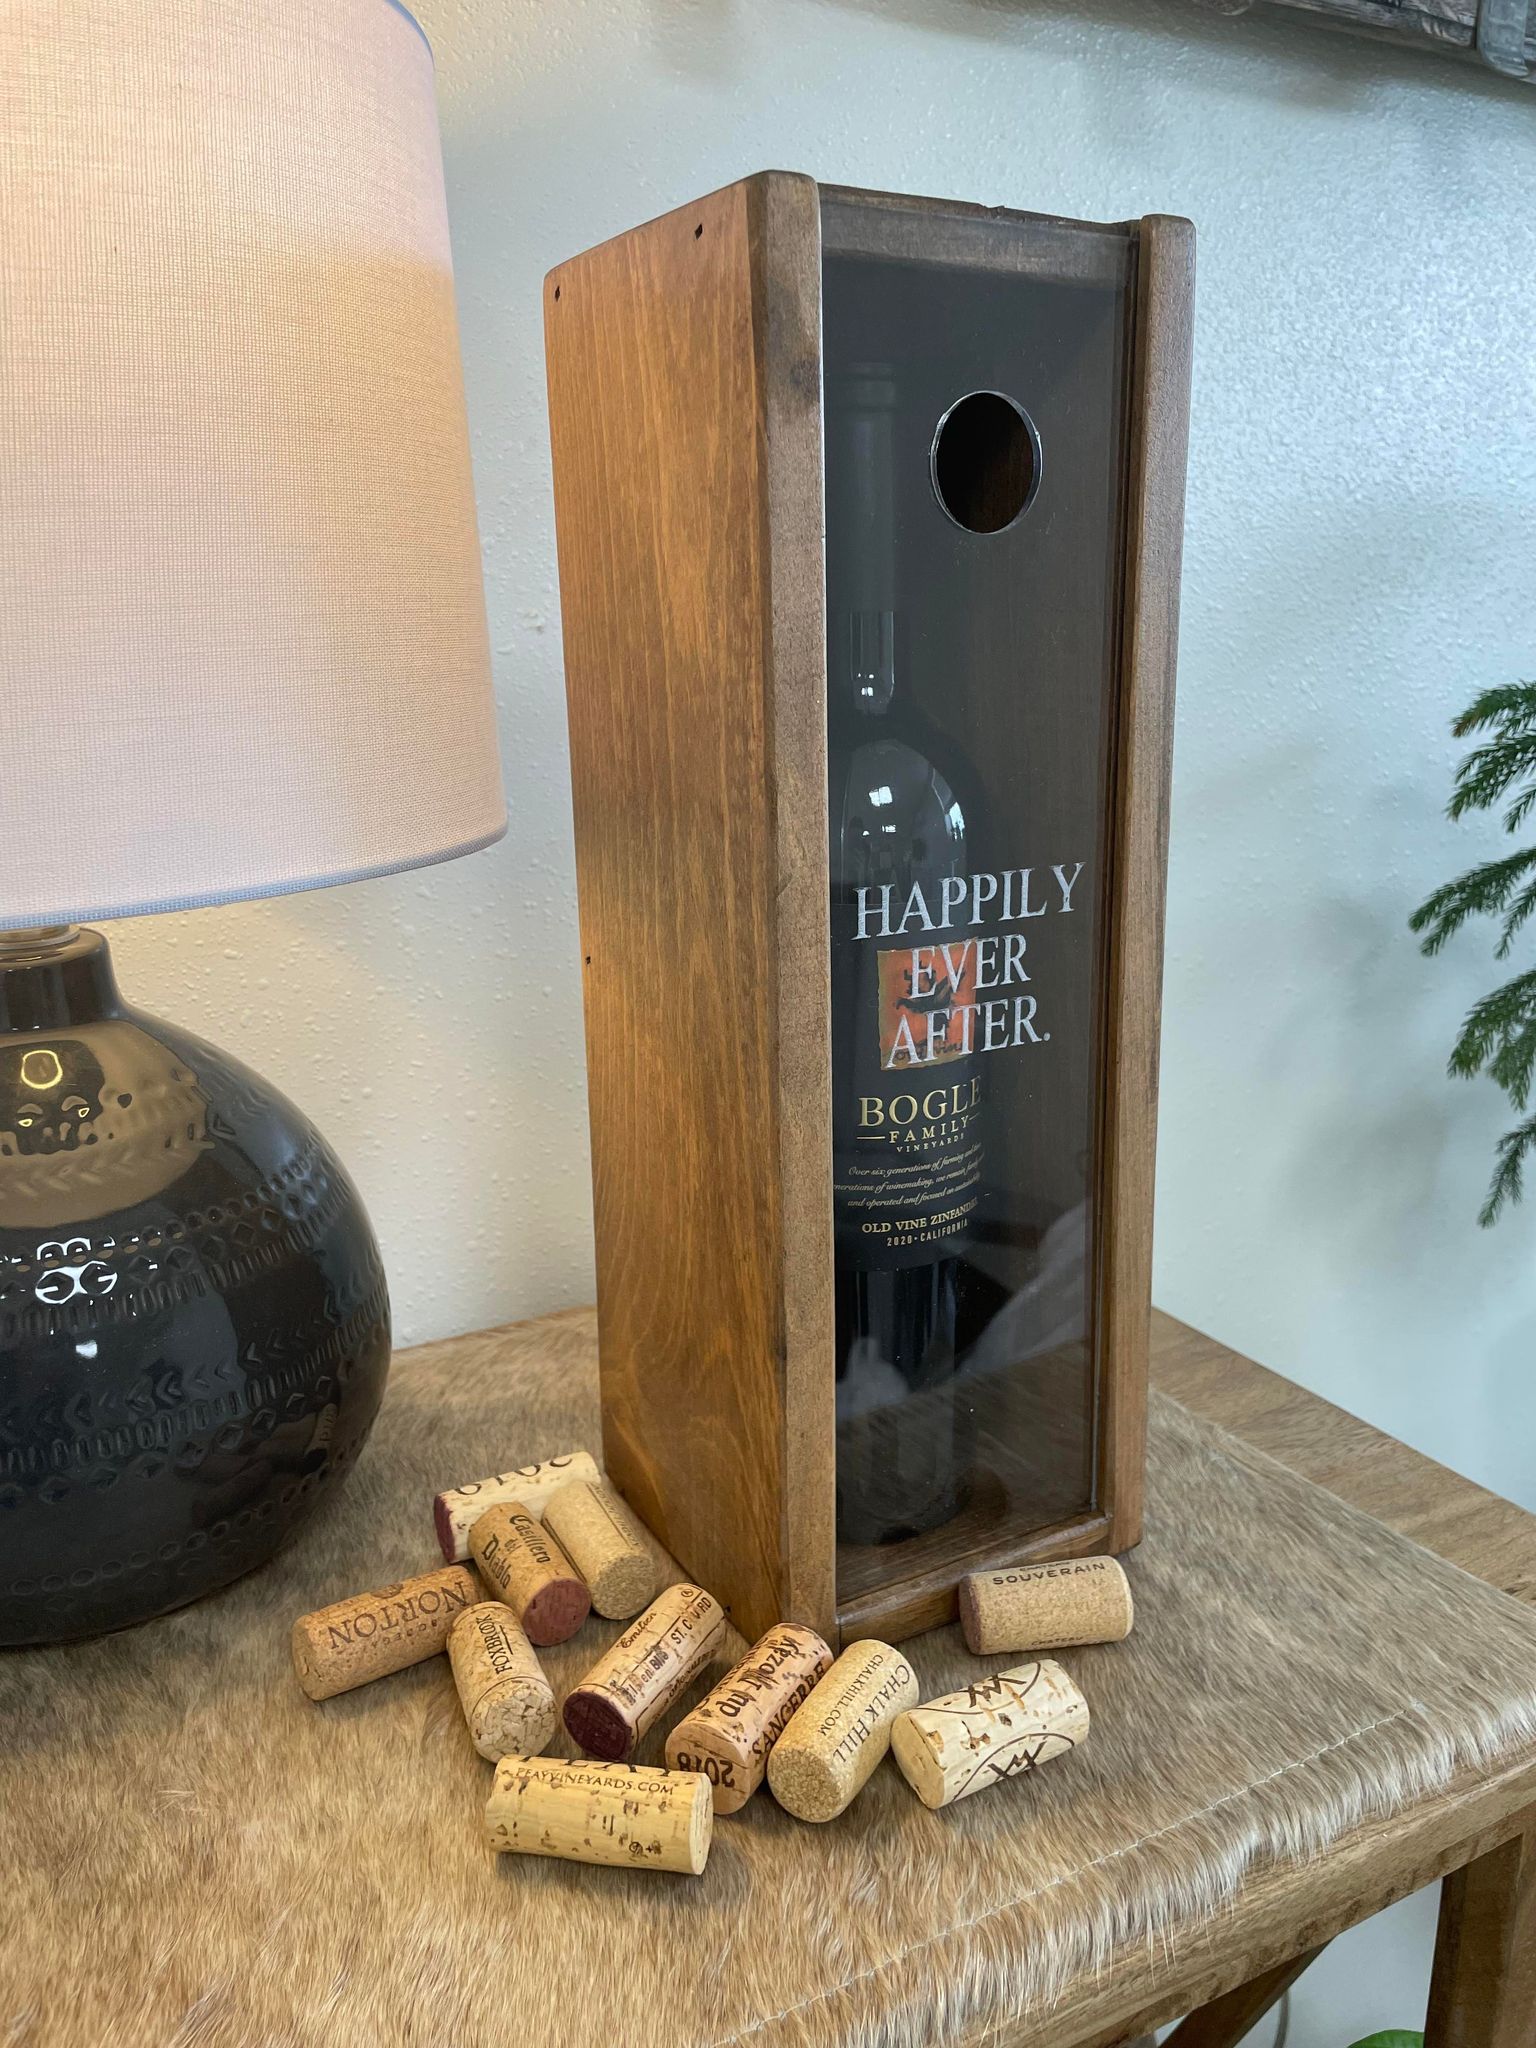 Pine Wood Wine Bottle Gift Box and Cork Holder, Happily Ever After, A Great Shower, Wedding or Anniversary Gift